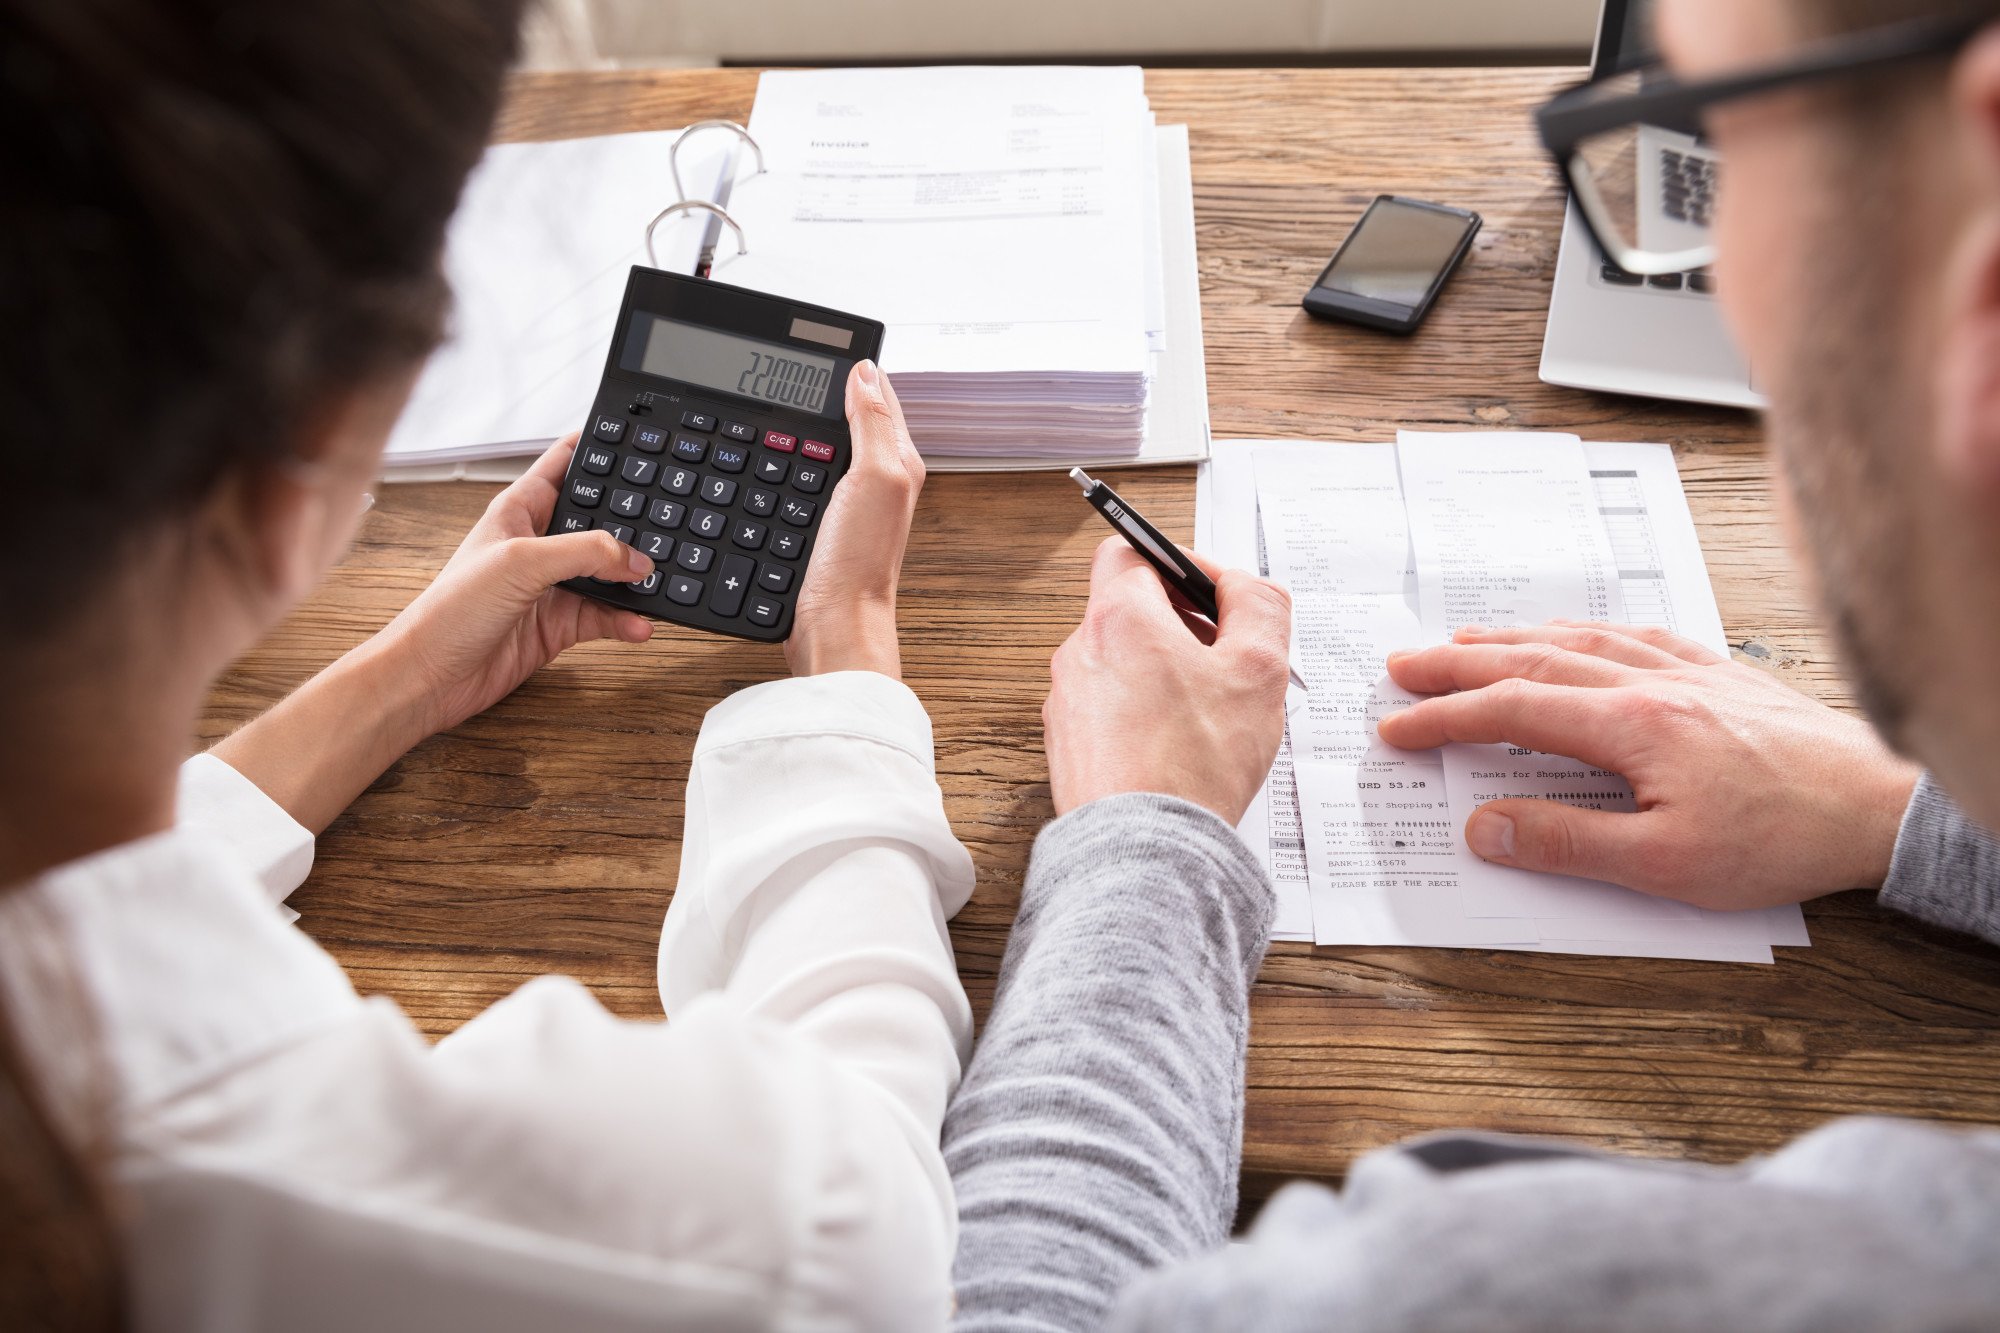 How to Calculate Prorated Rent